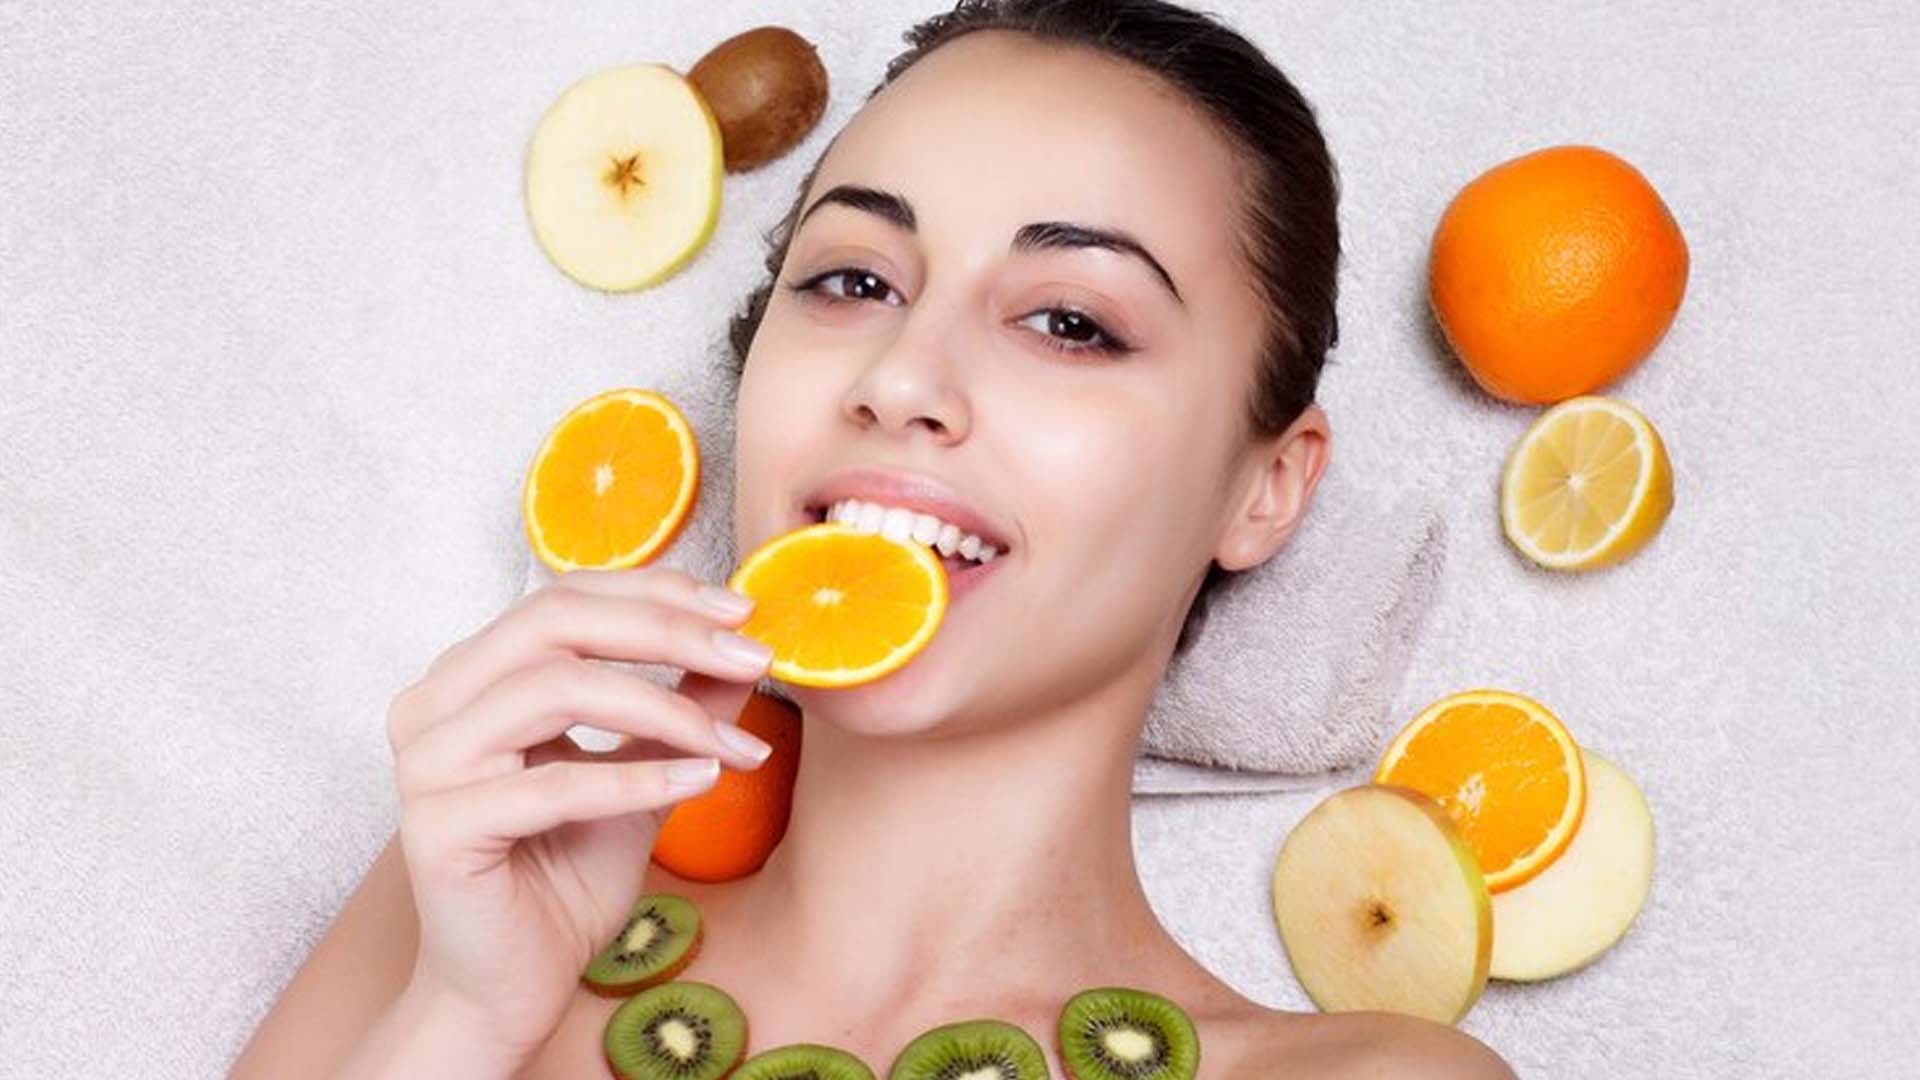 What are the Home Remedies for Clear and Glowing Skin?